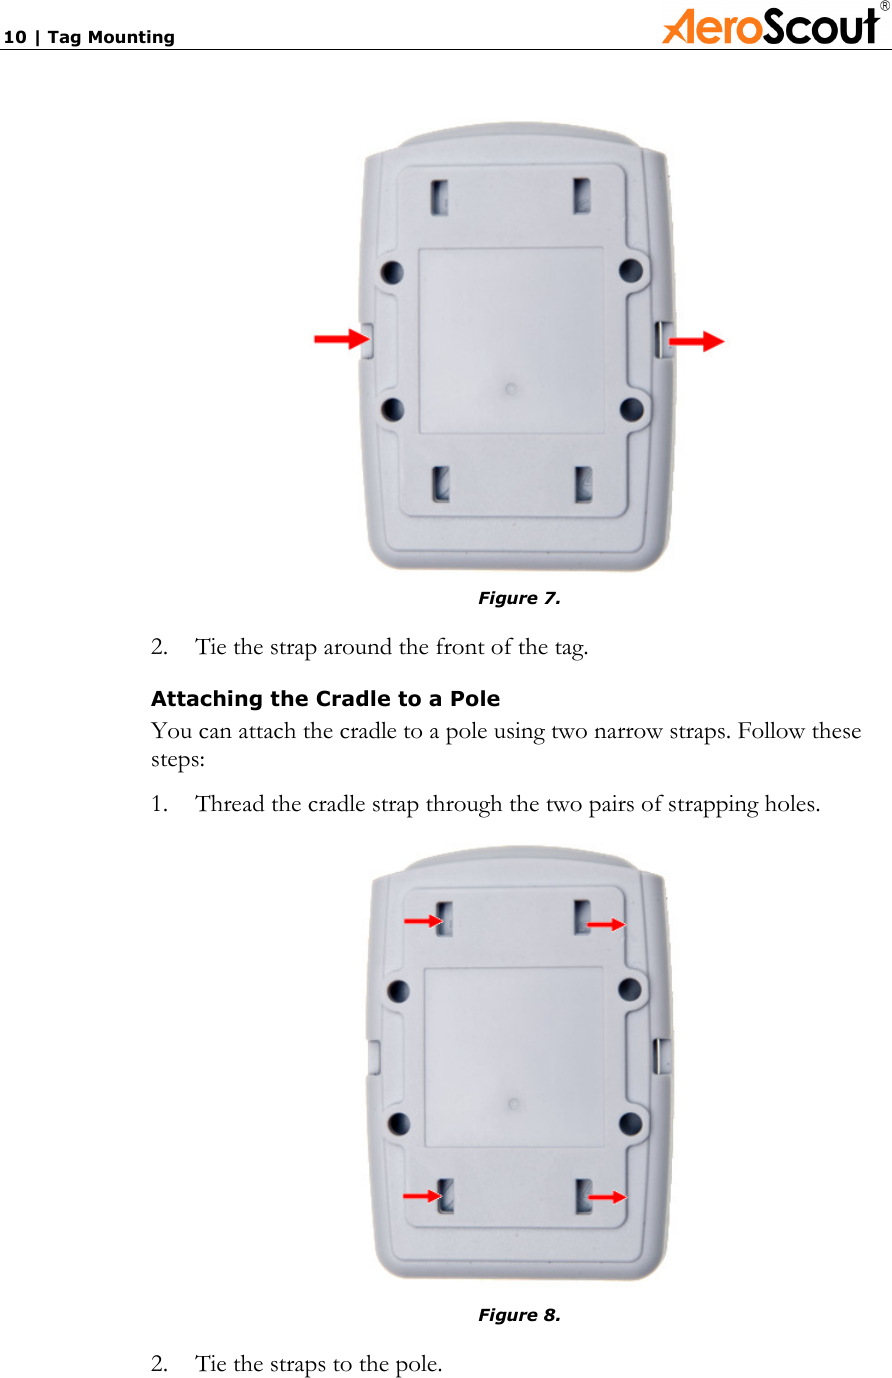 10 | Tag Mounting              Figure 7. 2.  Tie the strap around the front of the tag.  Attaching the Cradle to a Pole You can attach the cradle to a pole using two narrow straps. Follow these steps: 1.  Thread the cradle strap through the two pairs of strapping holes.  Figure 8. 2.  Tie the straps to the pole. 